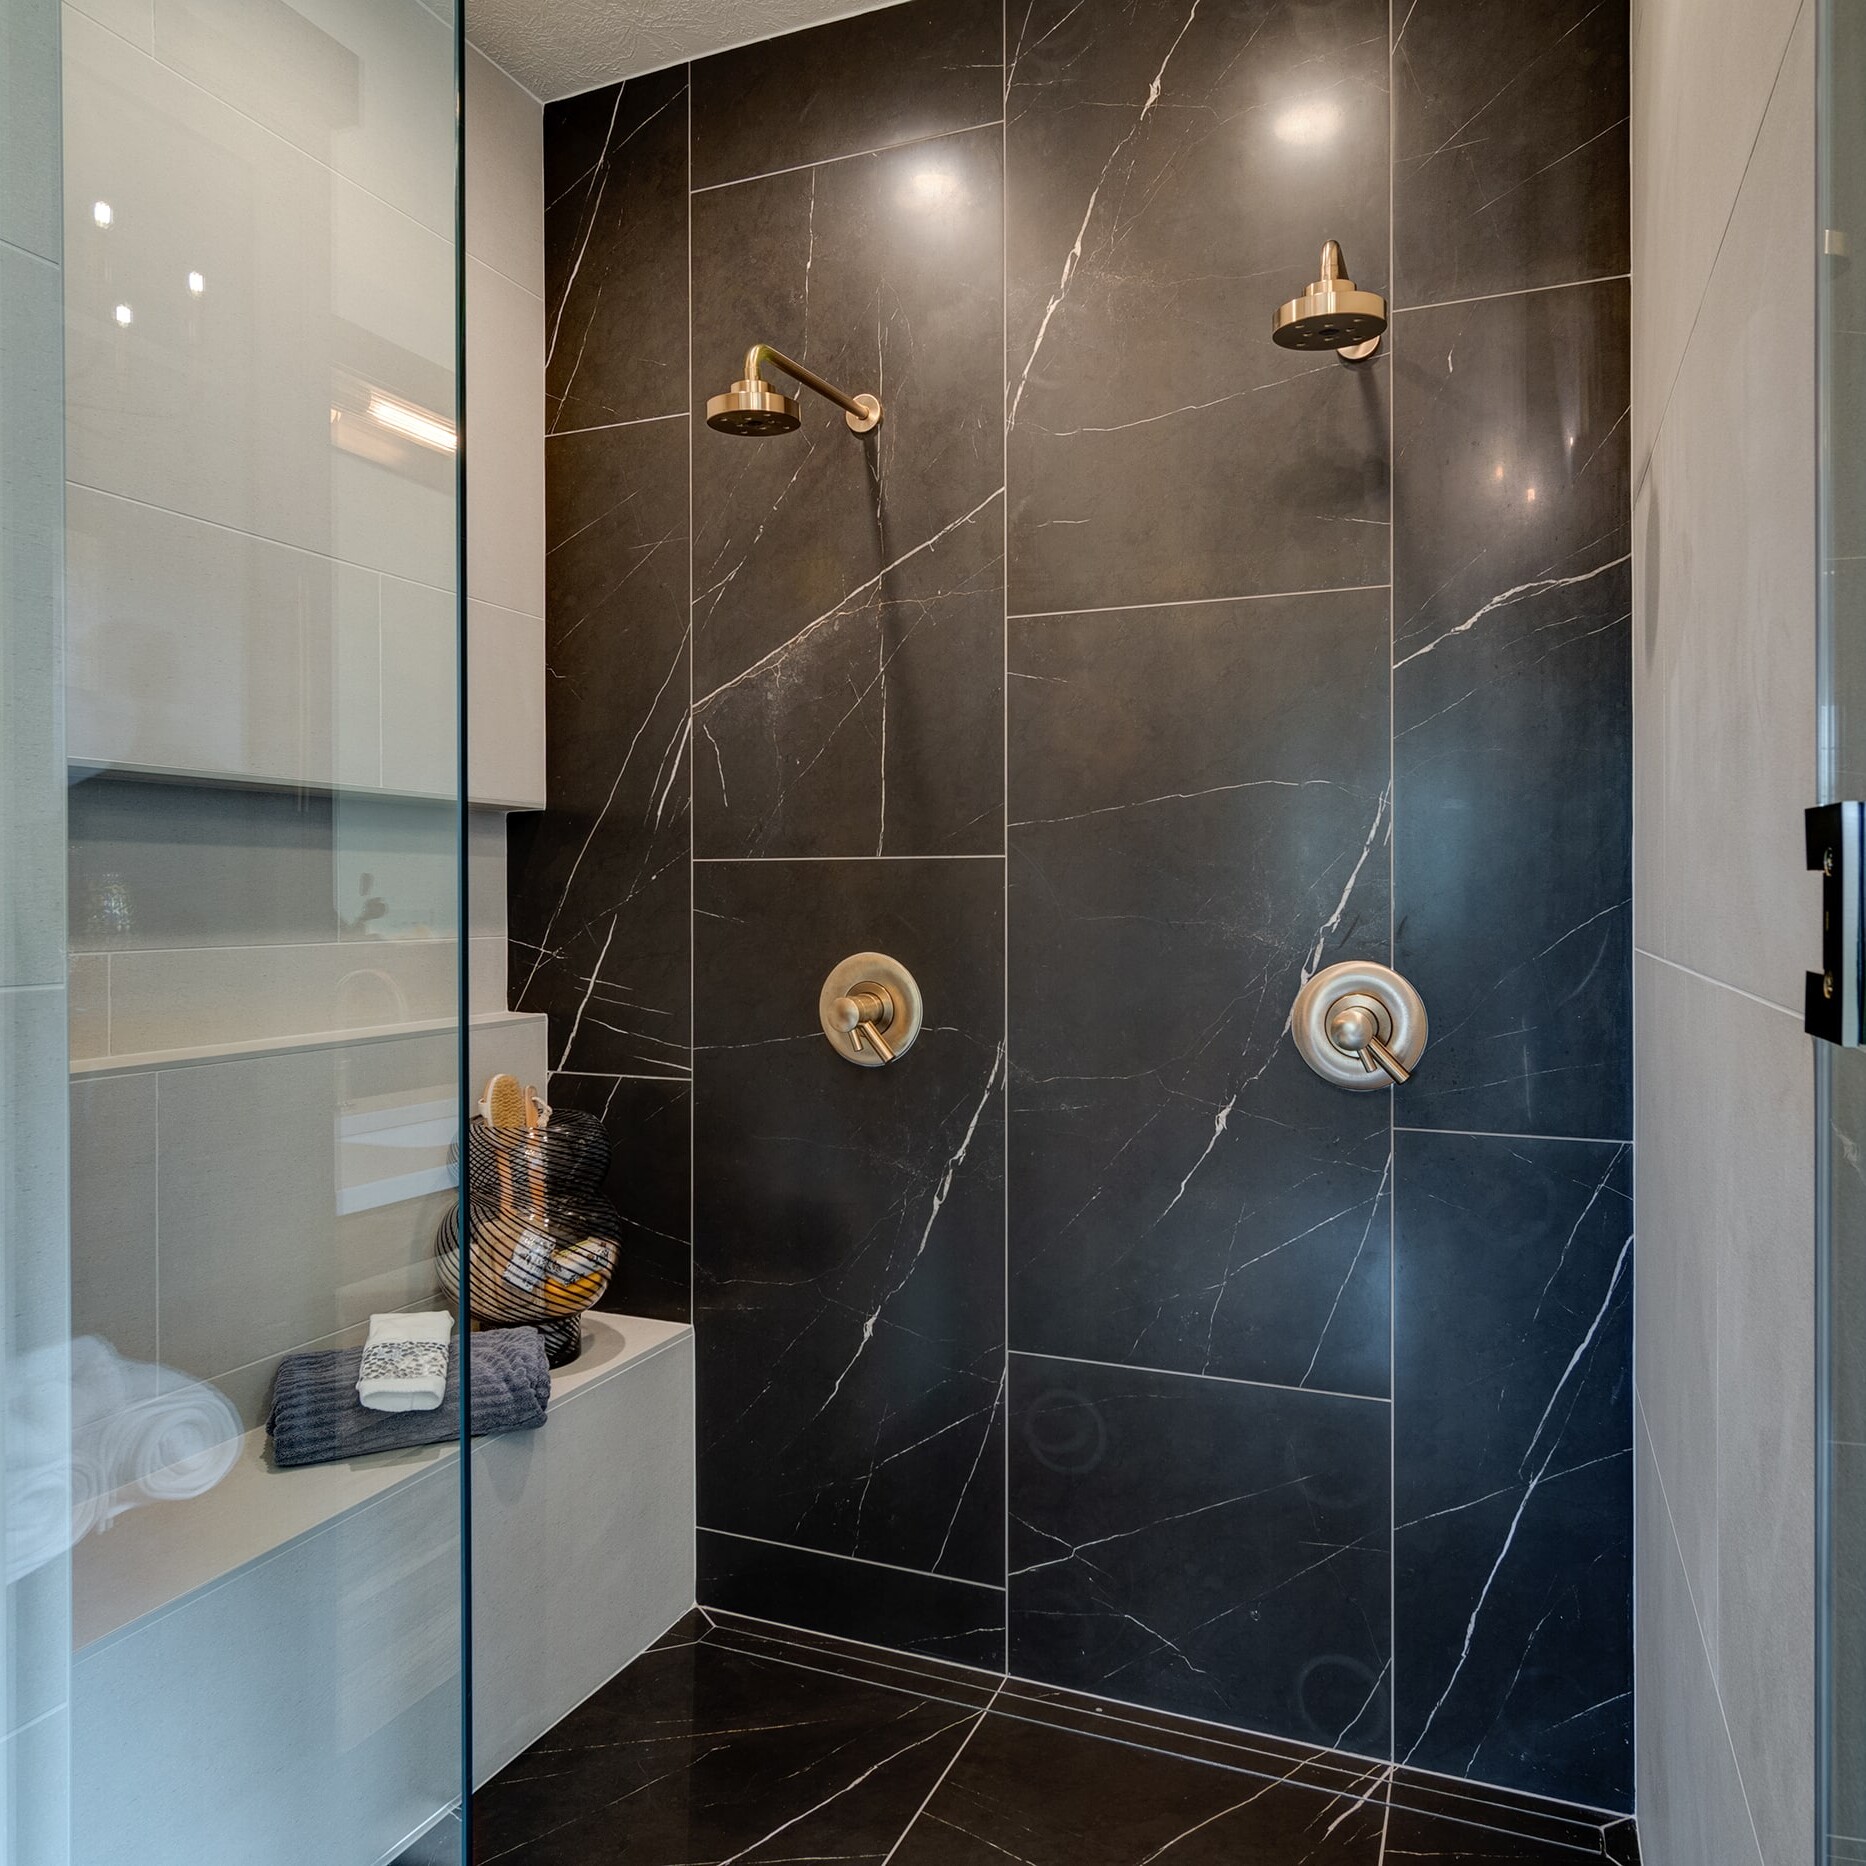 A bathroom with a glass shower door and black tile.